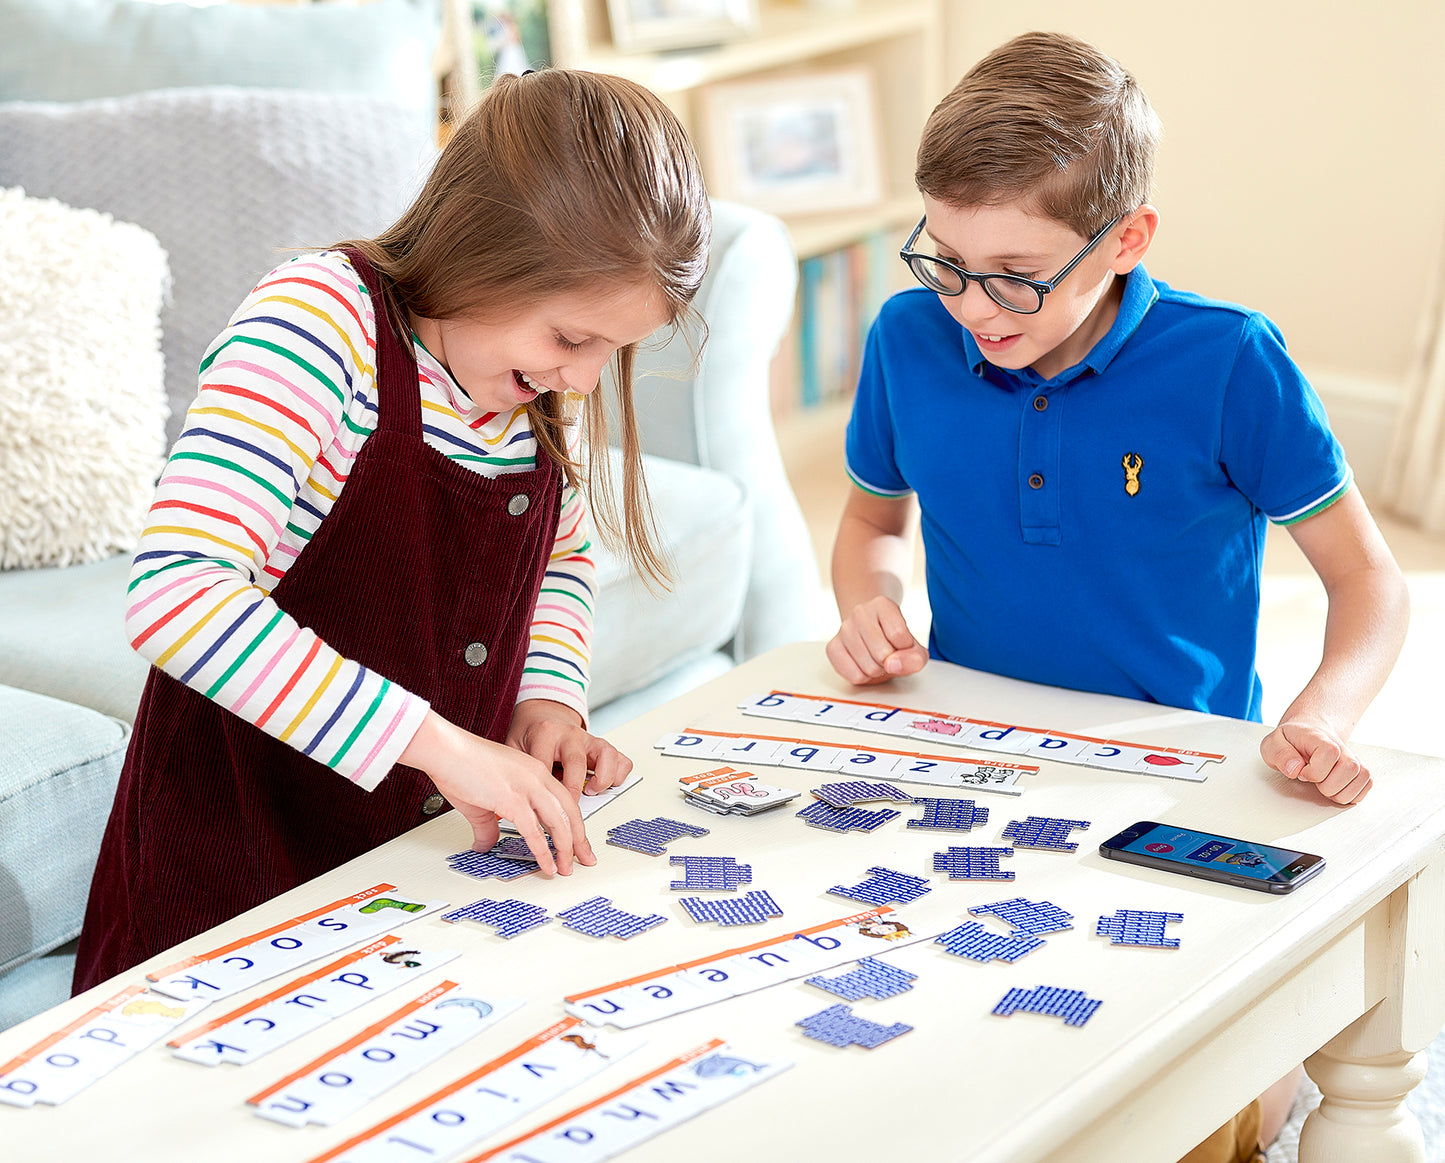 Orchard Toys Speed Spelling Fast-paced Literacy Game